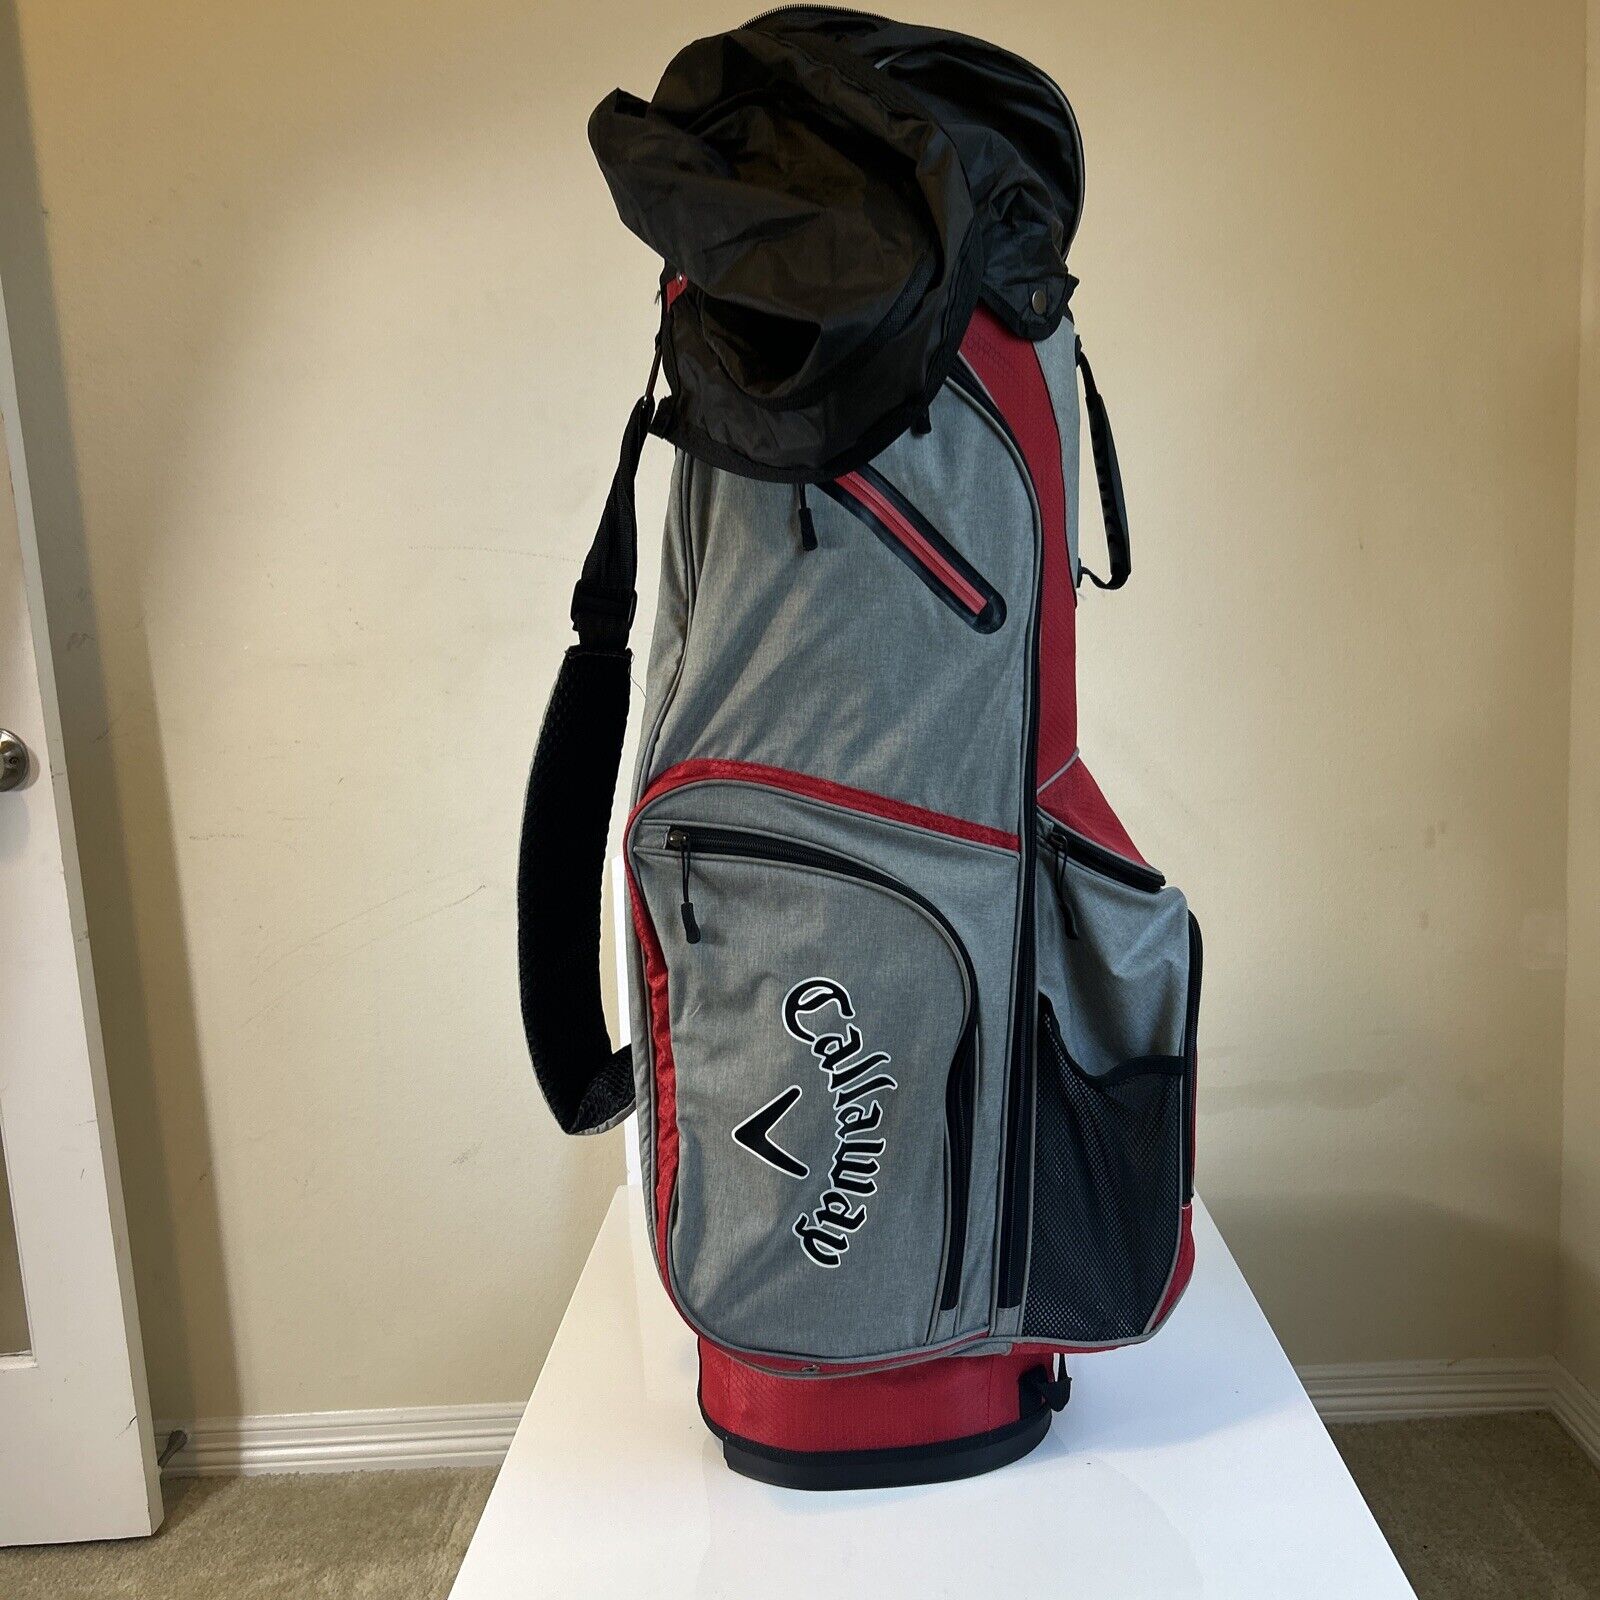 Callaway 14 Way 8 Pocket Gray/Red Cart Carry Golf Bag, With Rain Cover.